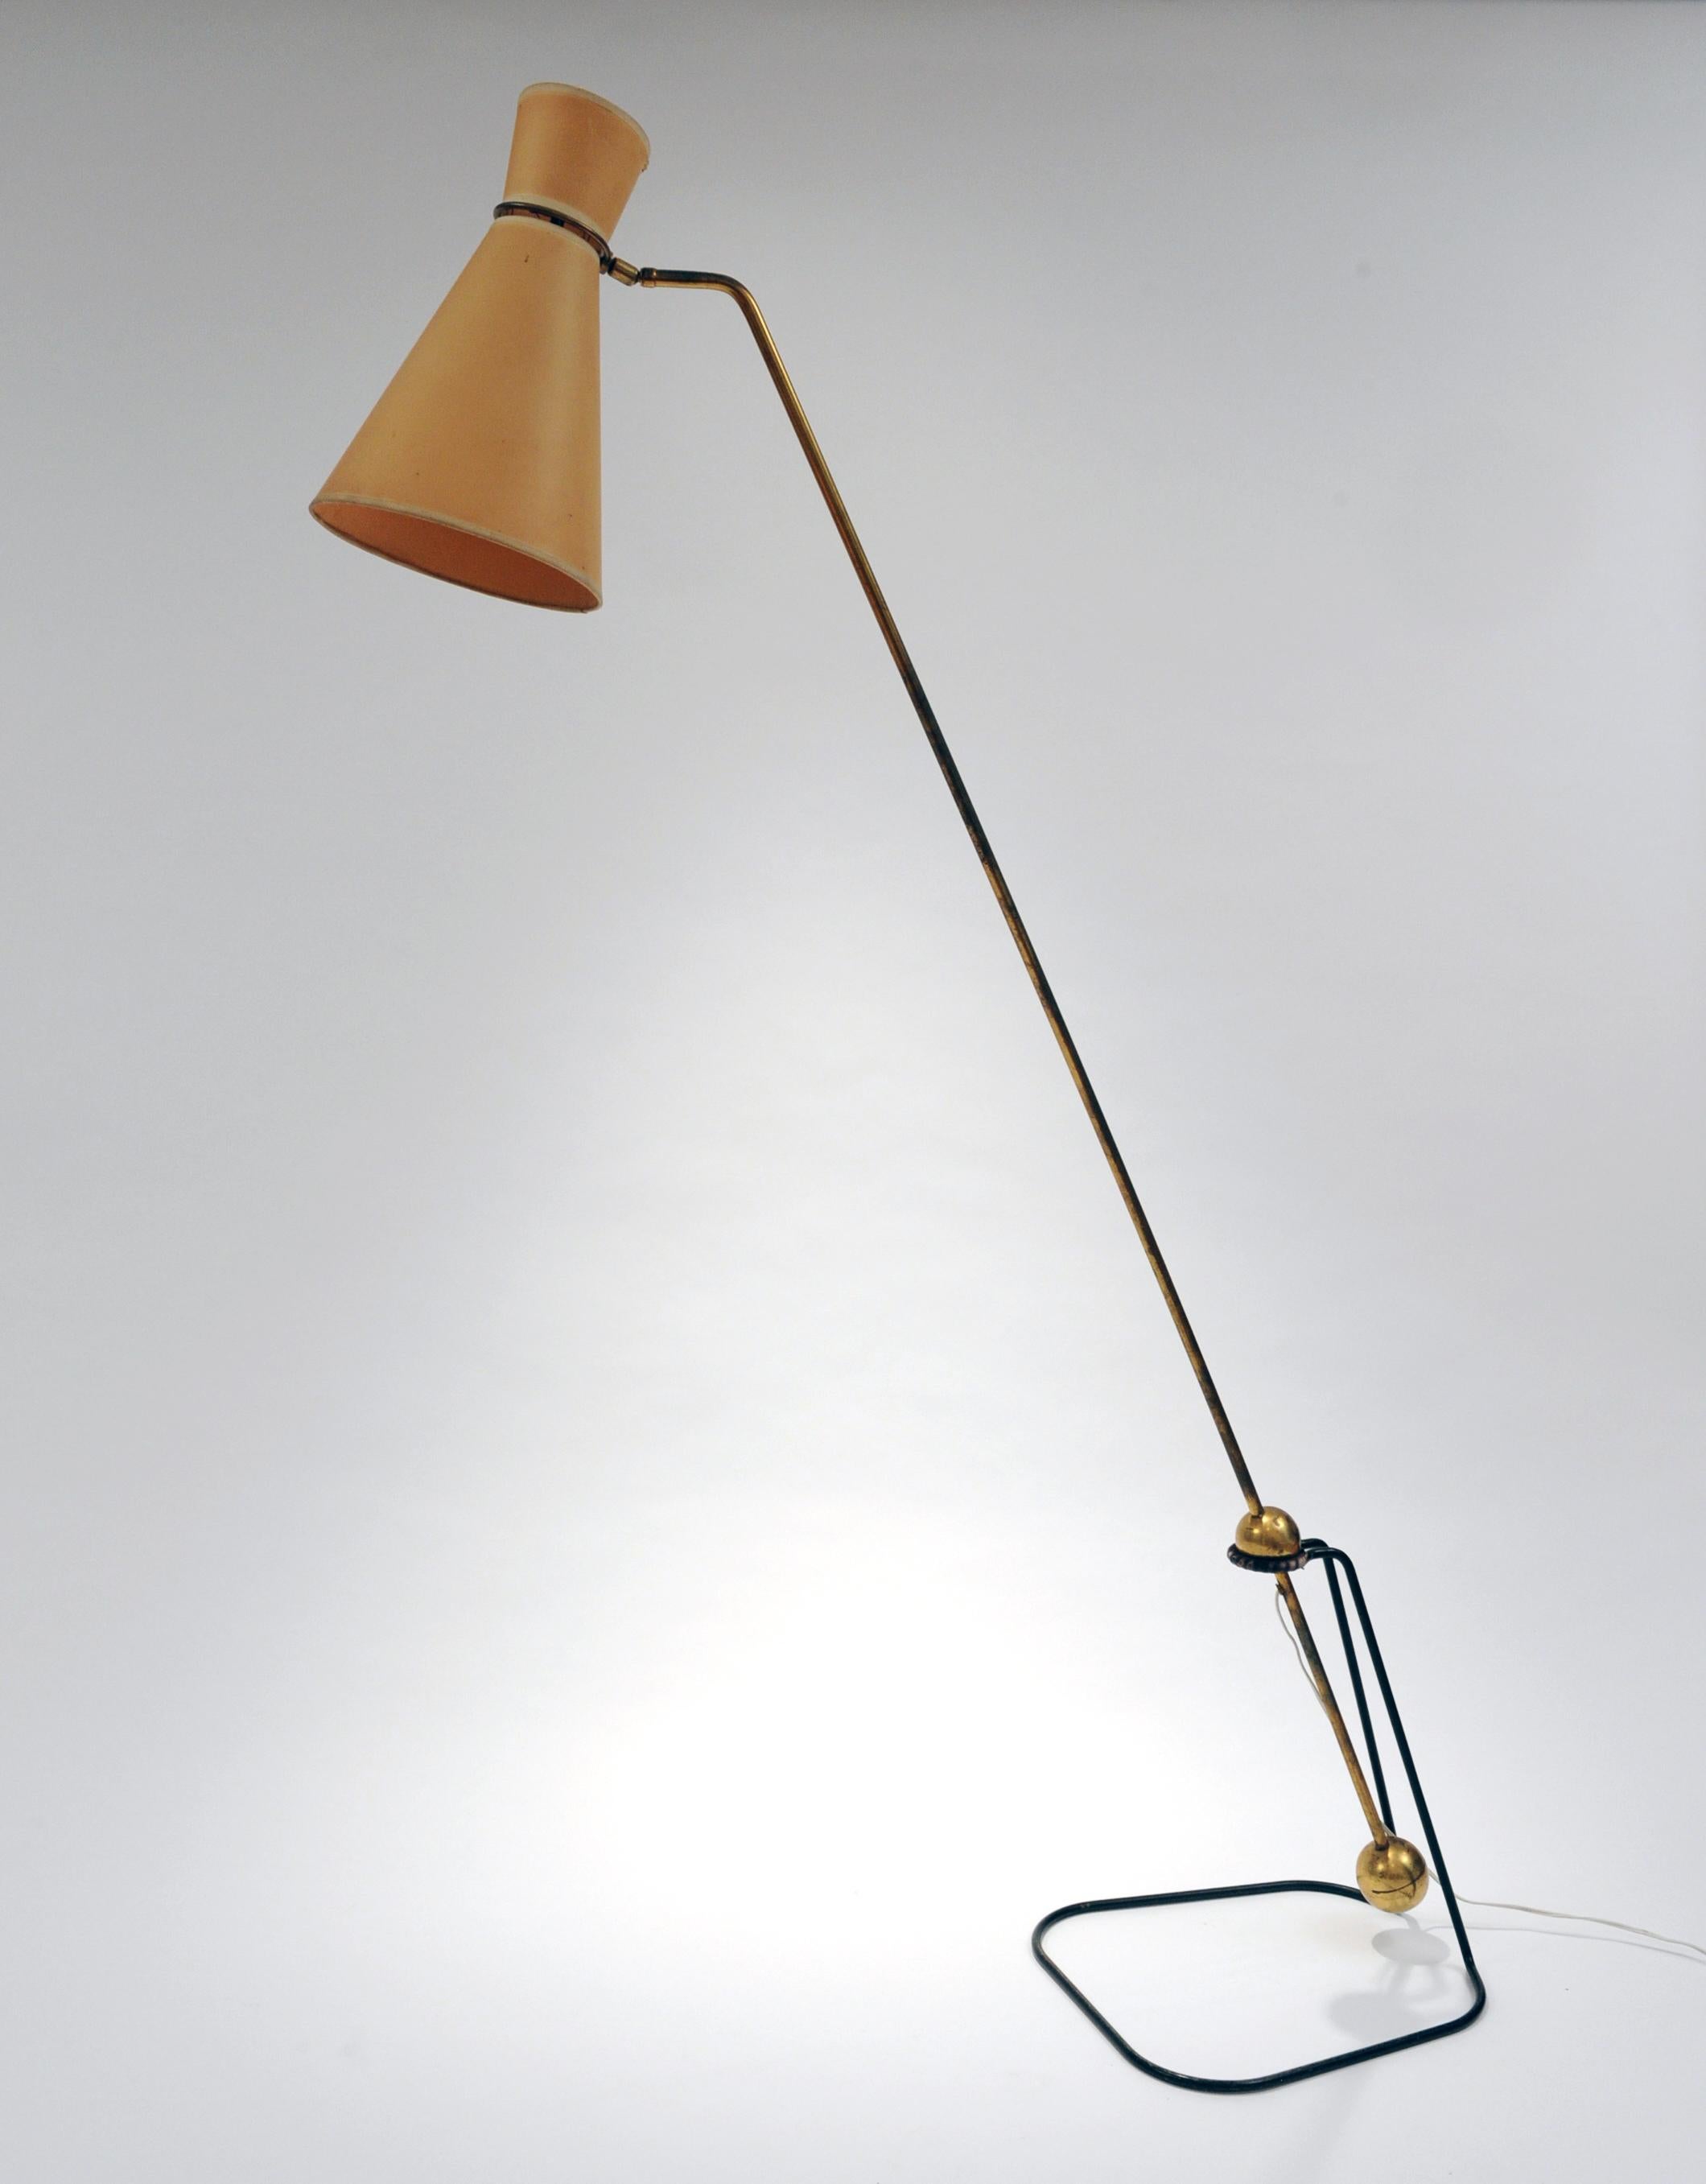 Counter balanced floor lamp by Pierre Guariche (1926-1995). Lamp is made of brass, enameled steel and retains the original parchment shade.